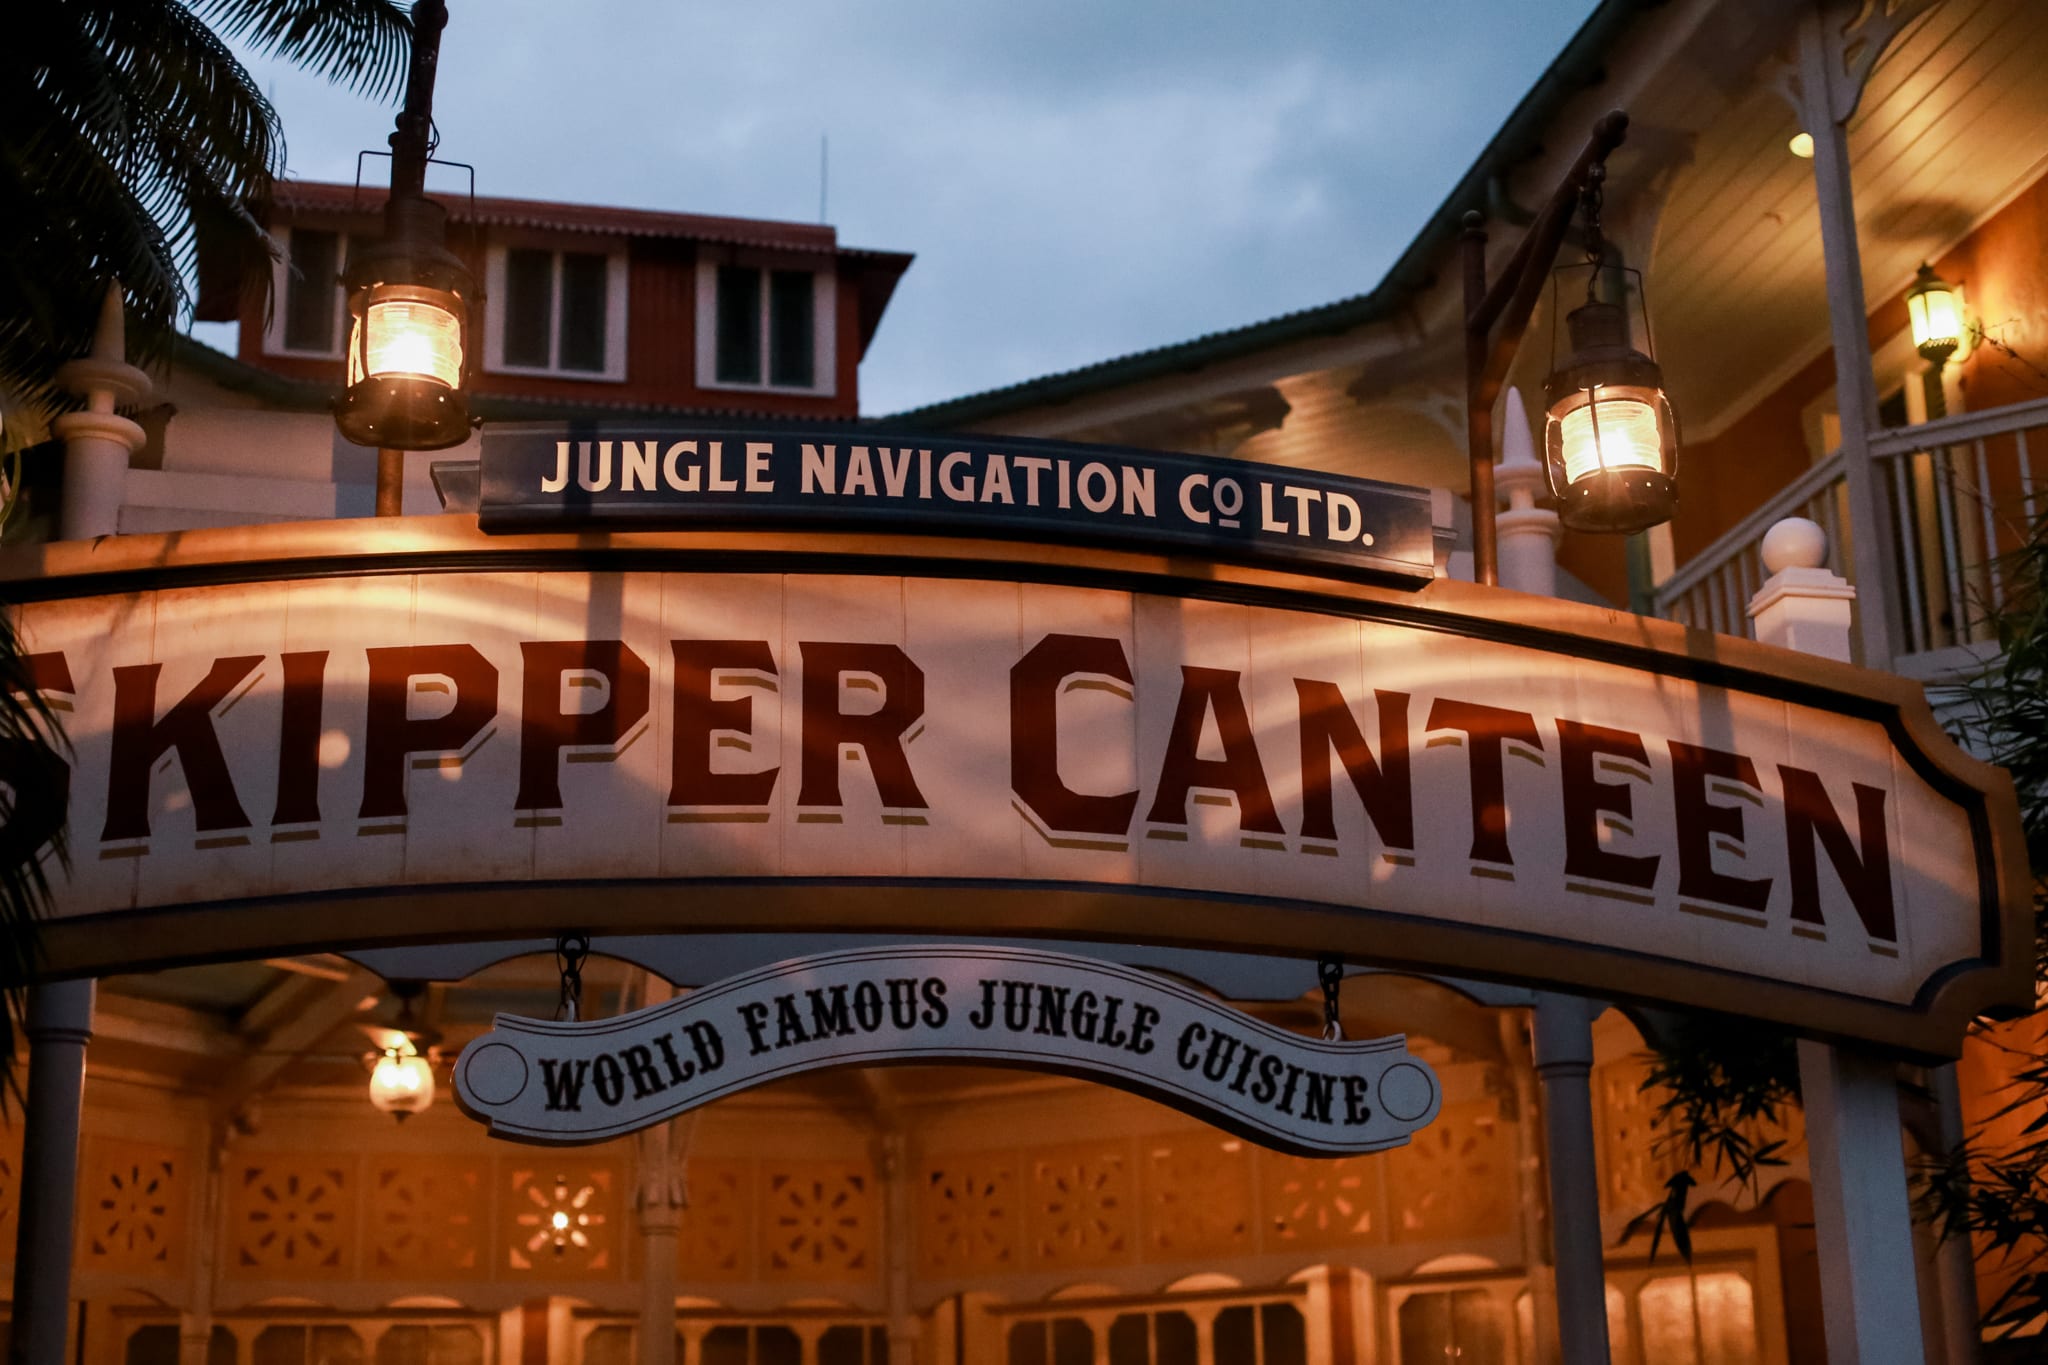 Jungle Navigation Co Skipper Canteen Helena Woods Travel Guide to Walt Disney World Magic Kingdom 2018 Dining, Shows, Attractions for Adults Couples Jungle Cruise 